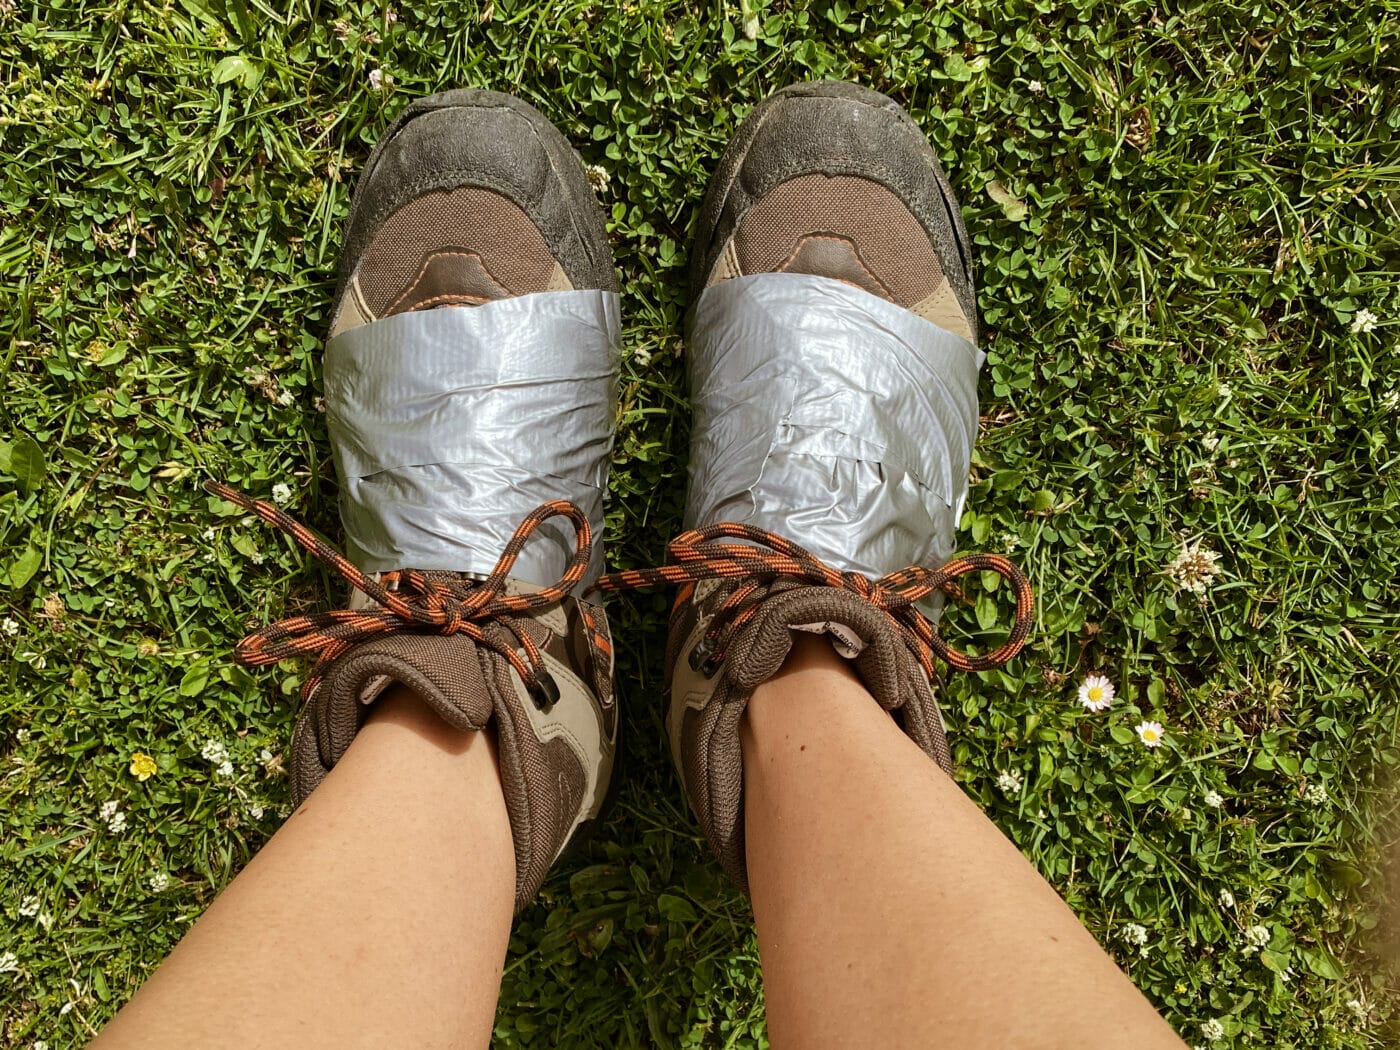 hiking shoes that have been duct tape to help keep them together since soles fell apart